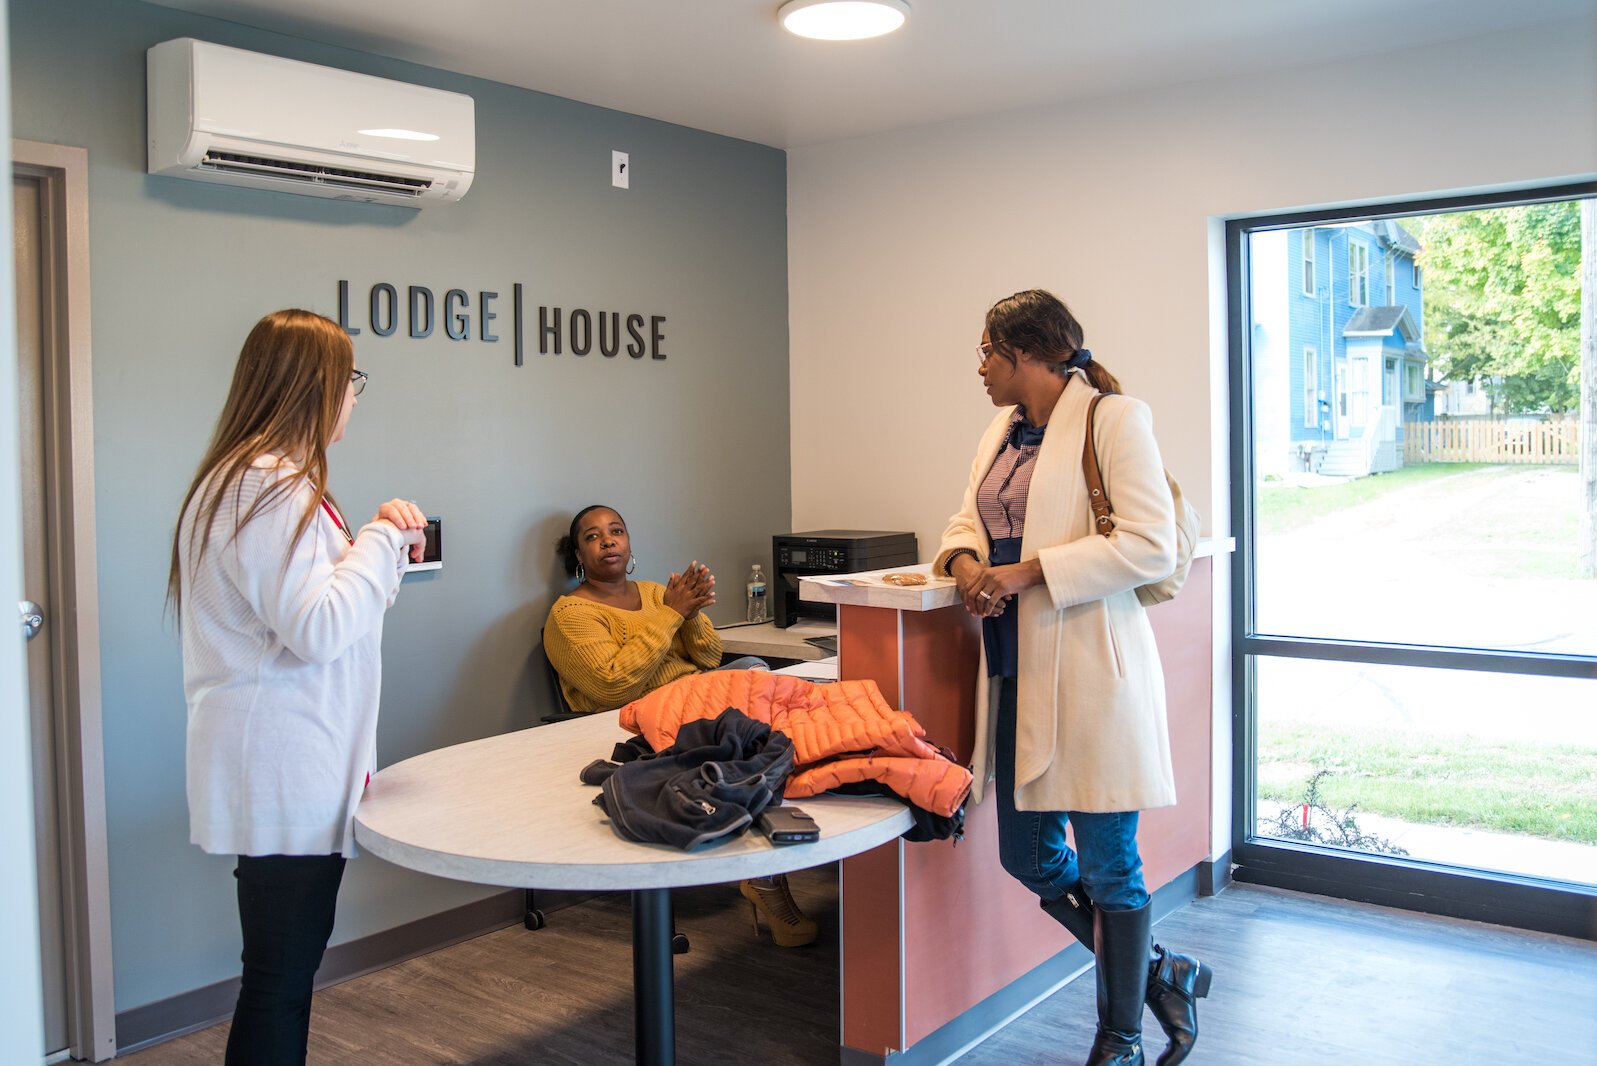 The office area of LodgeHouse and an adjacent area will provide space for area organizations to provide services to help residents, all of whom are expected to be formerly unhoused people.